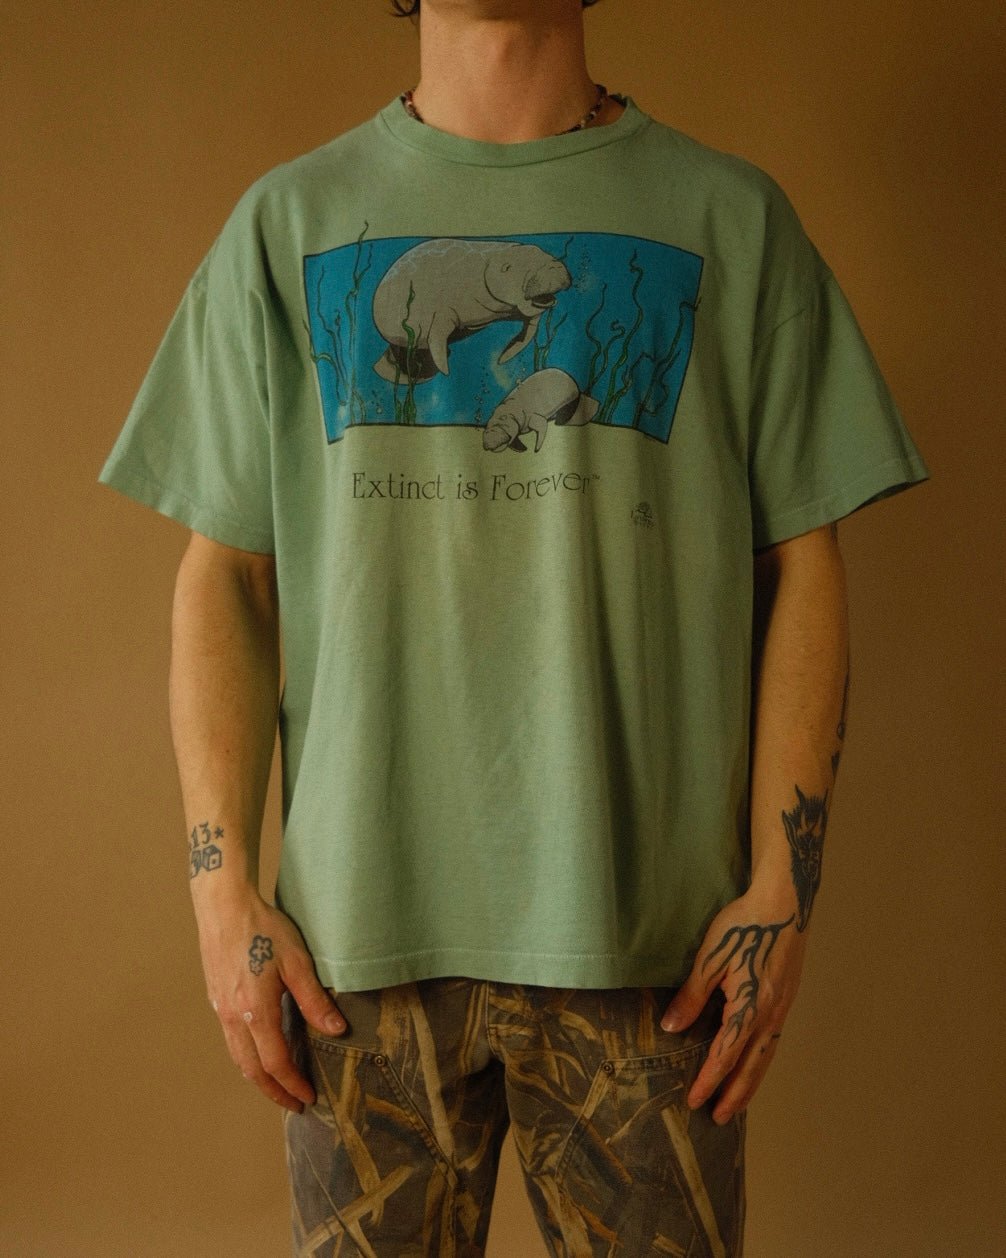 1990 “Extinction is Forever” Manatee Tee